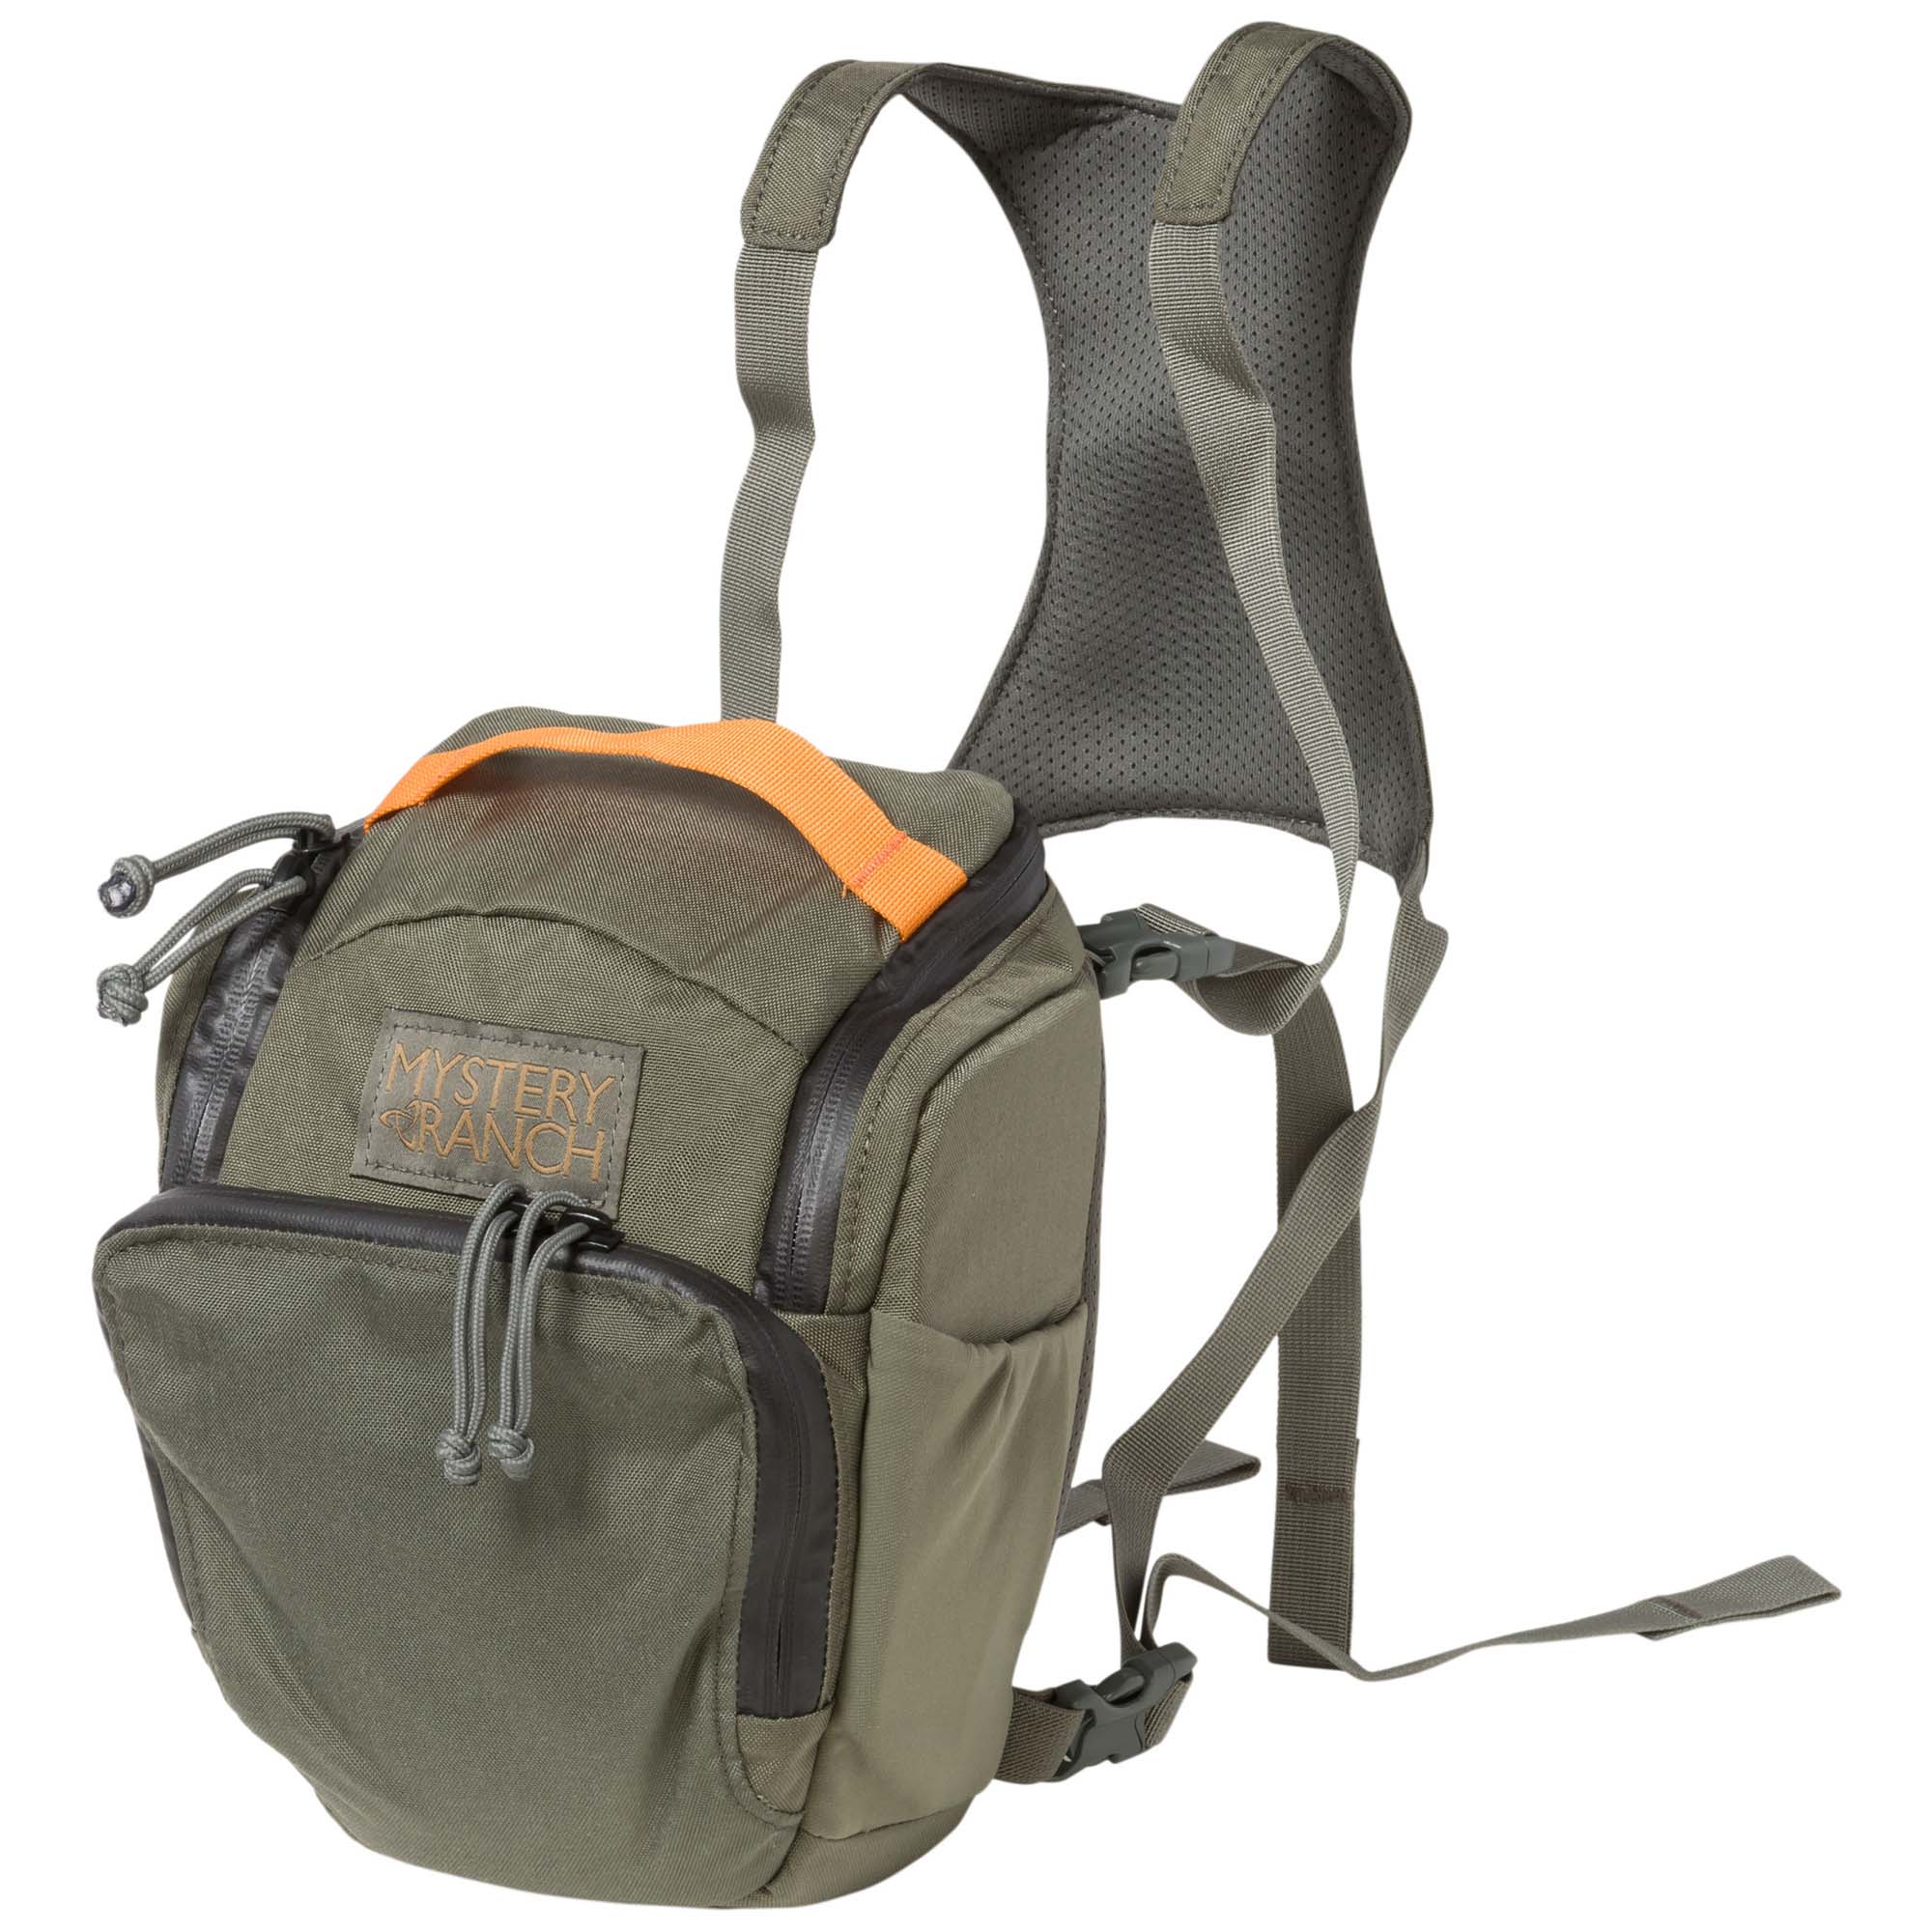 Mystery Ranch  DSLR Chest Rig 3L Camera Carry Bag